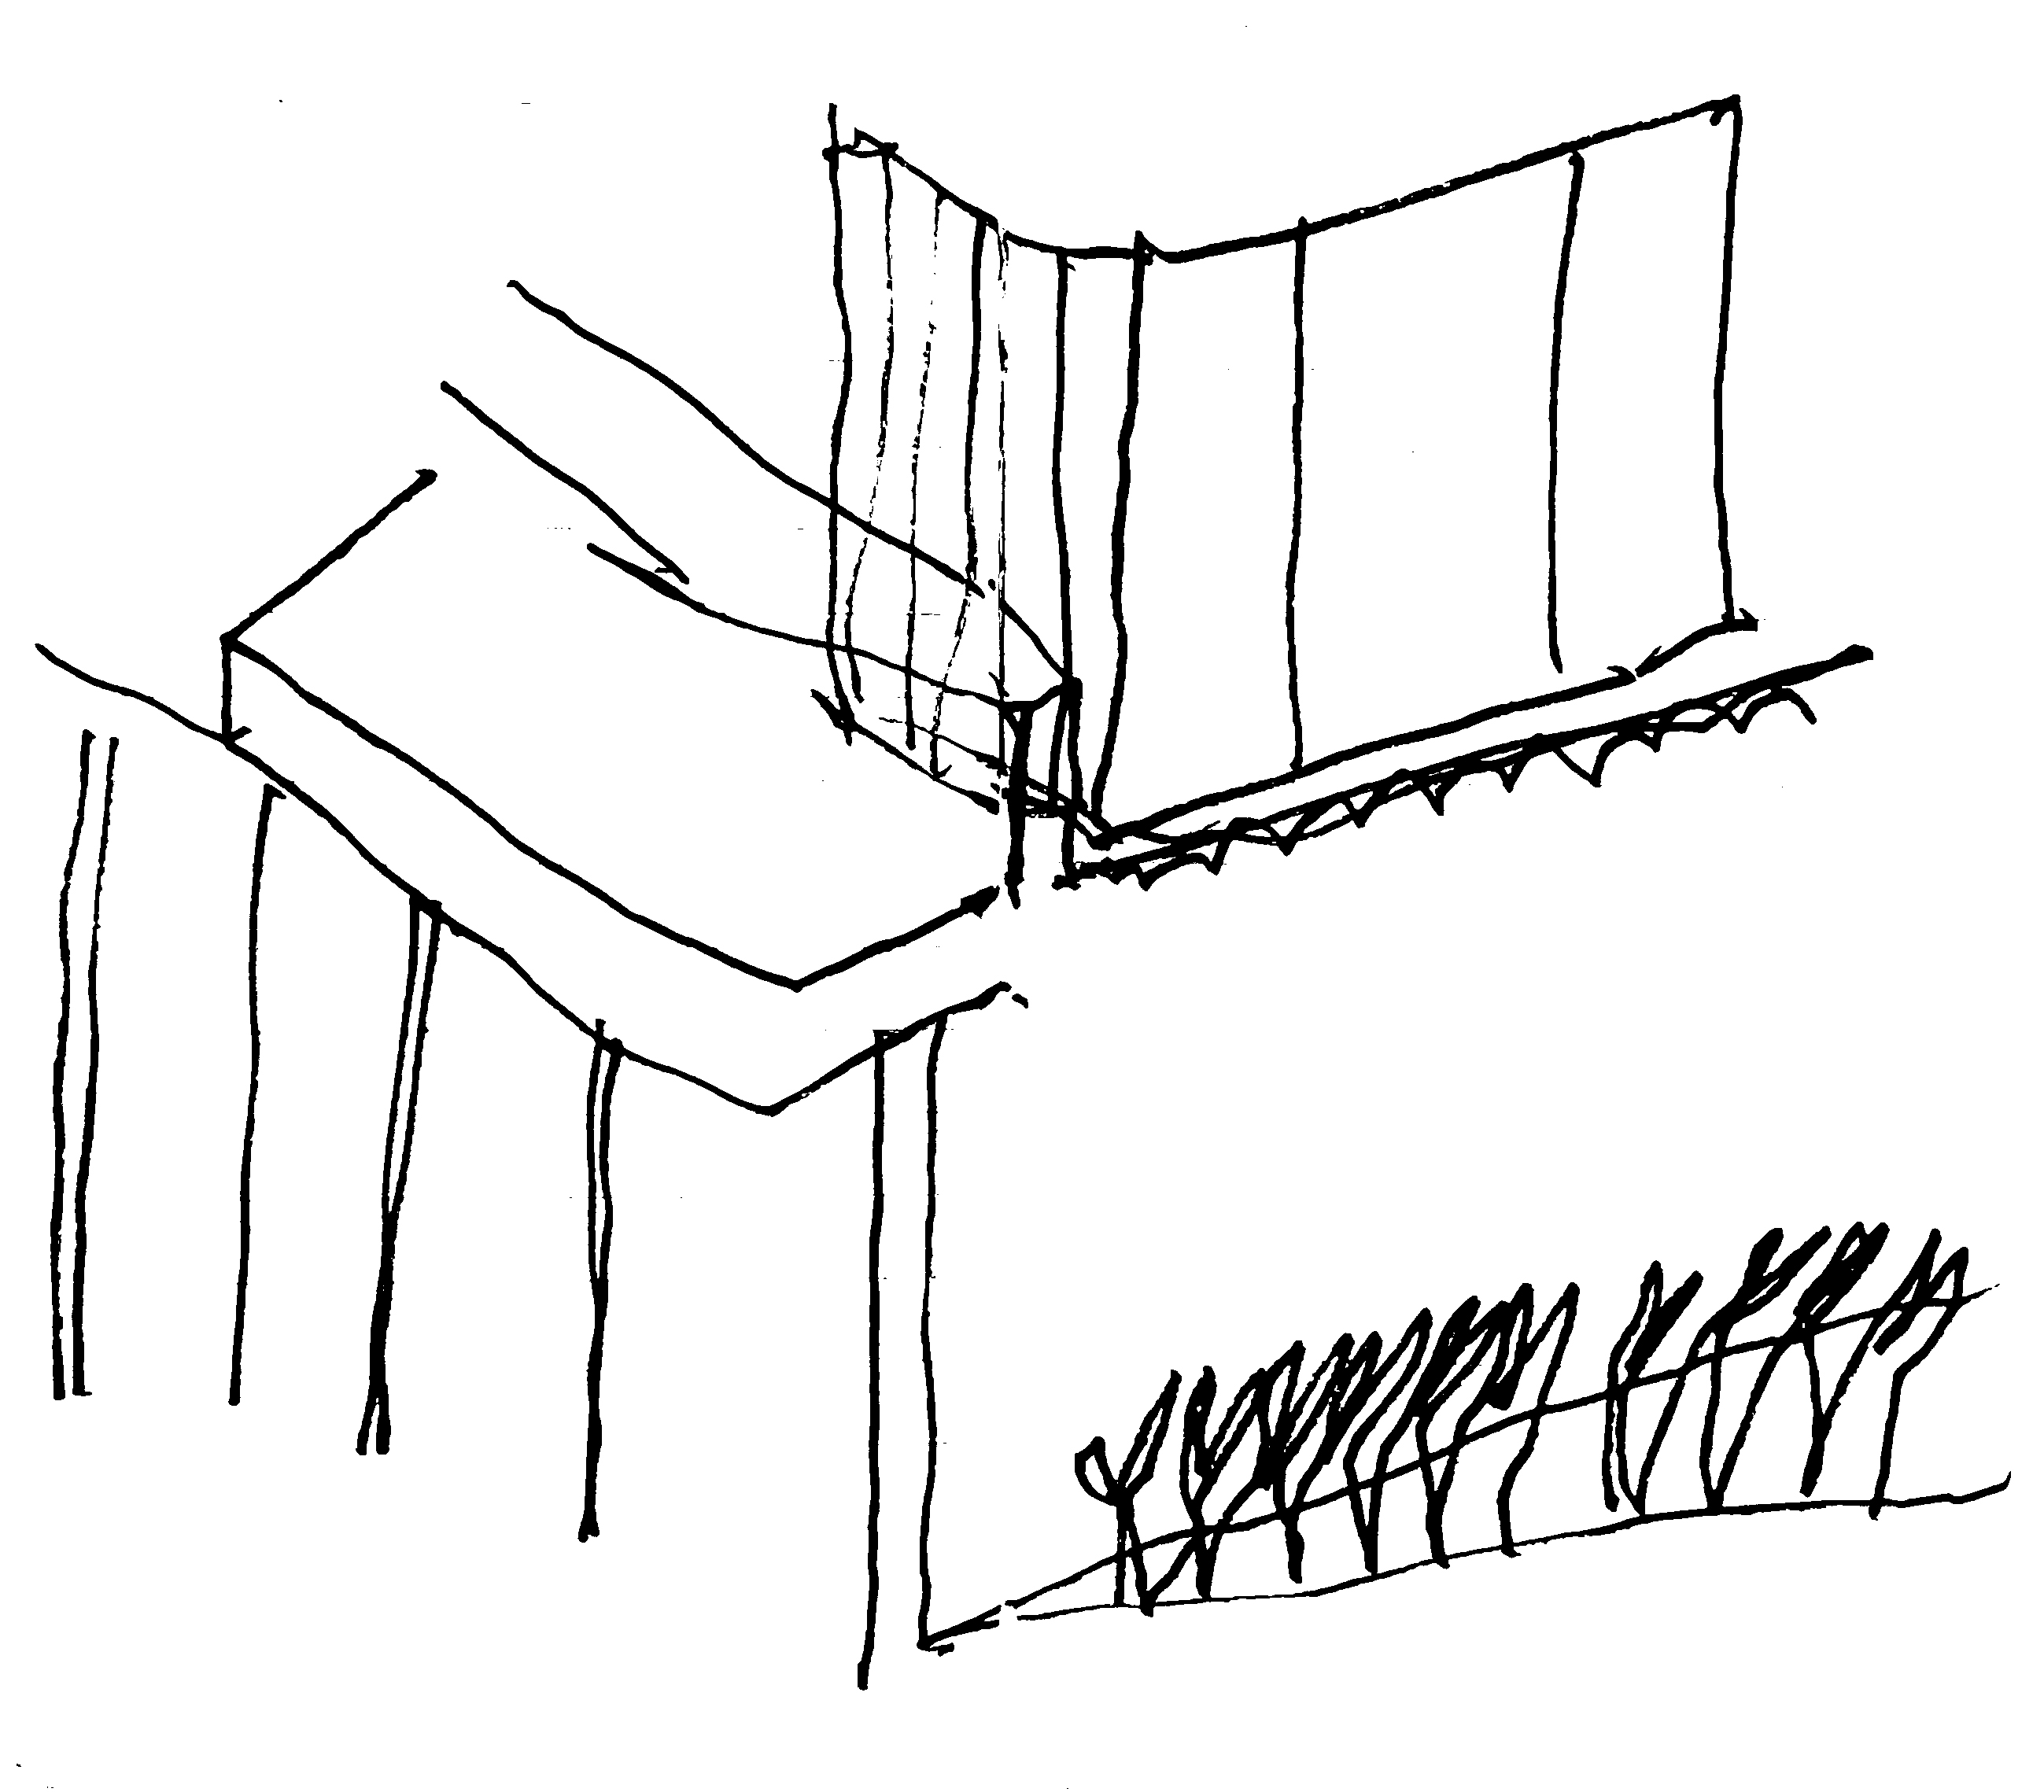 pen drawing of a building corner